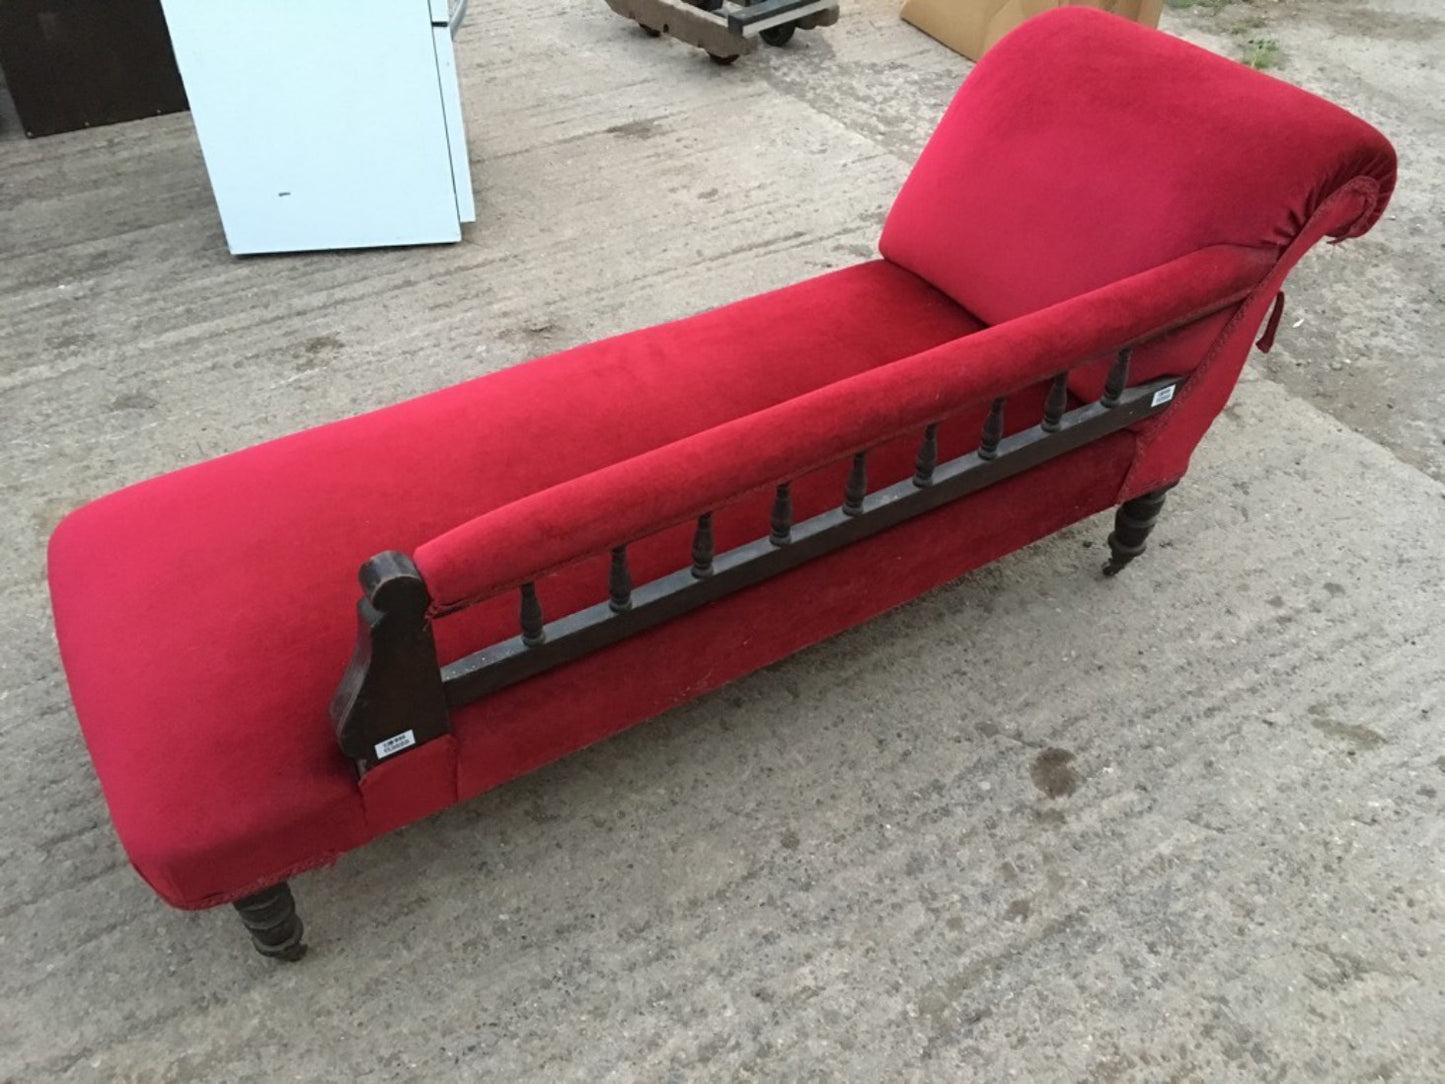 Antique Victorian Mahogany & Red Material Chaise Longue Sofa Chair TLC